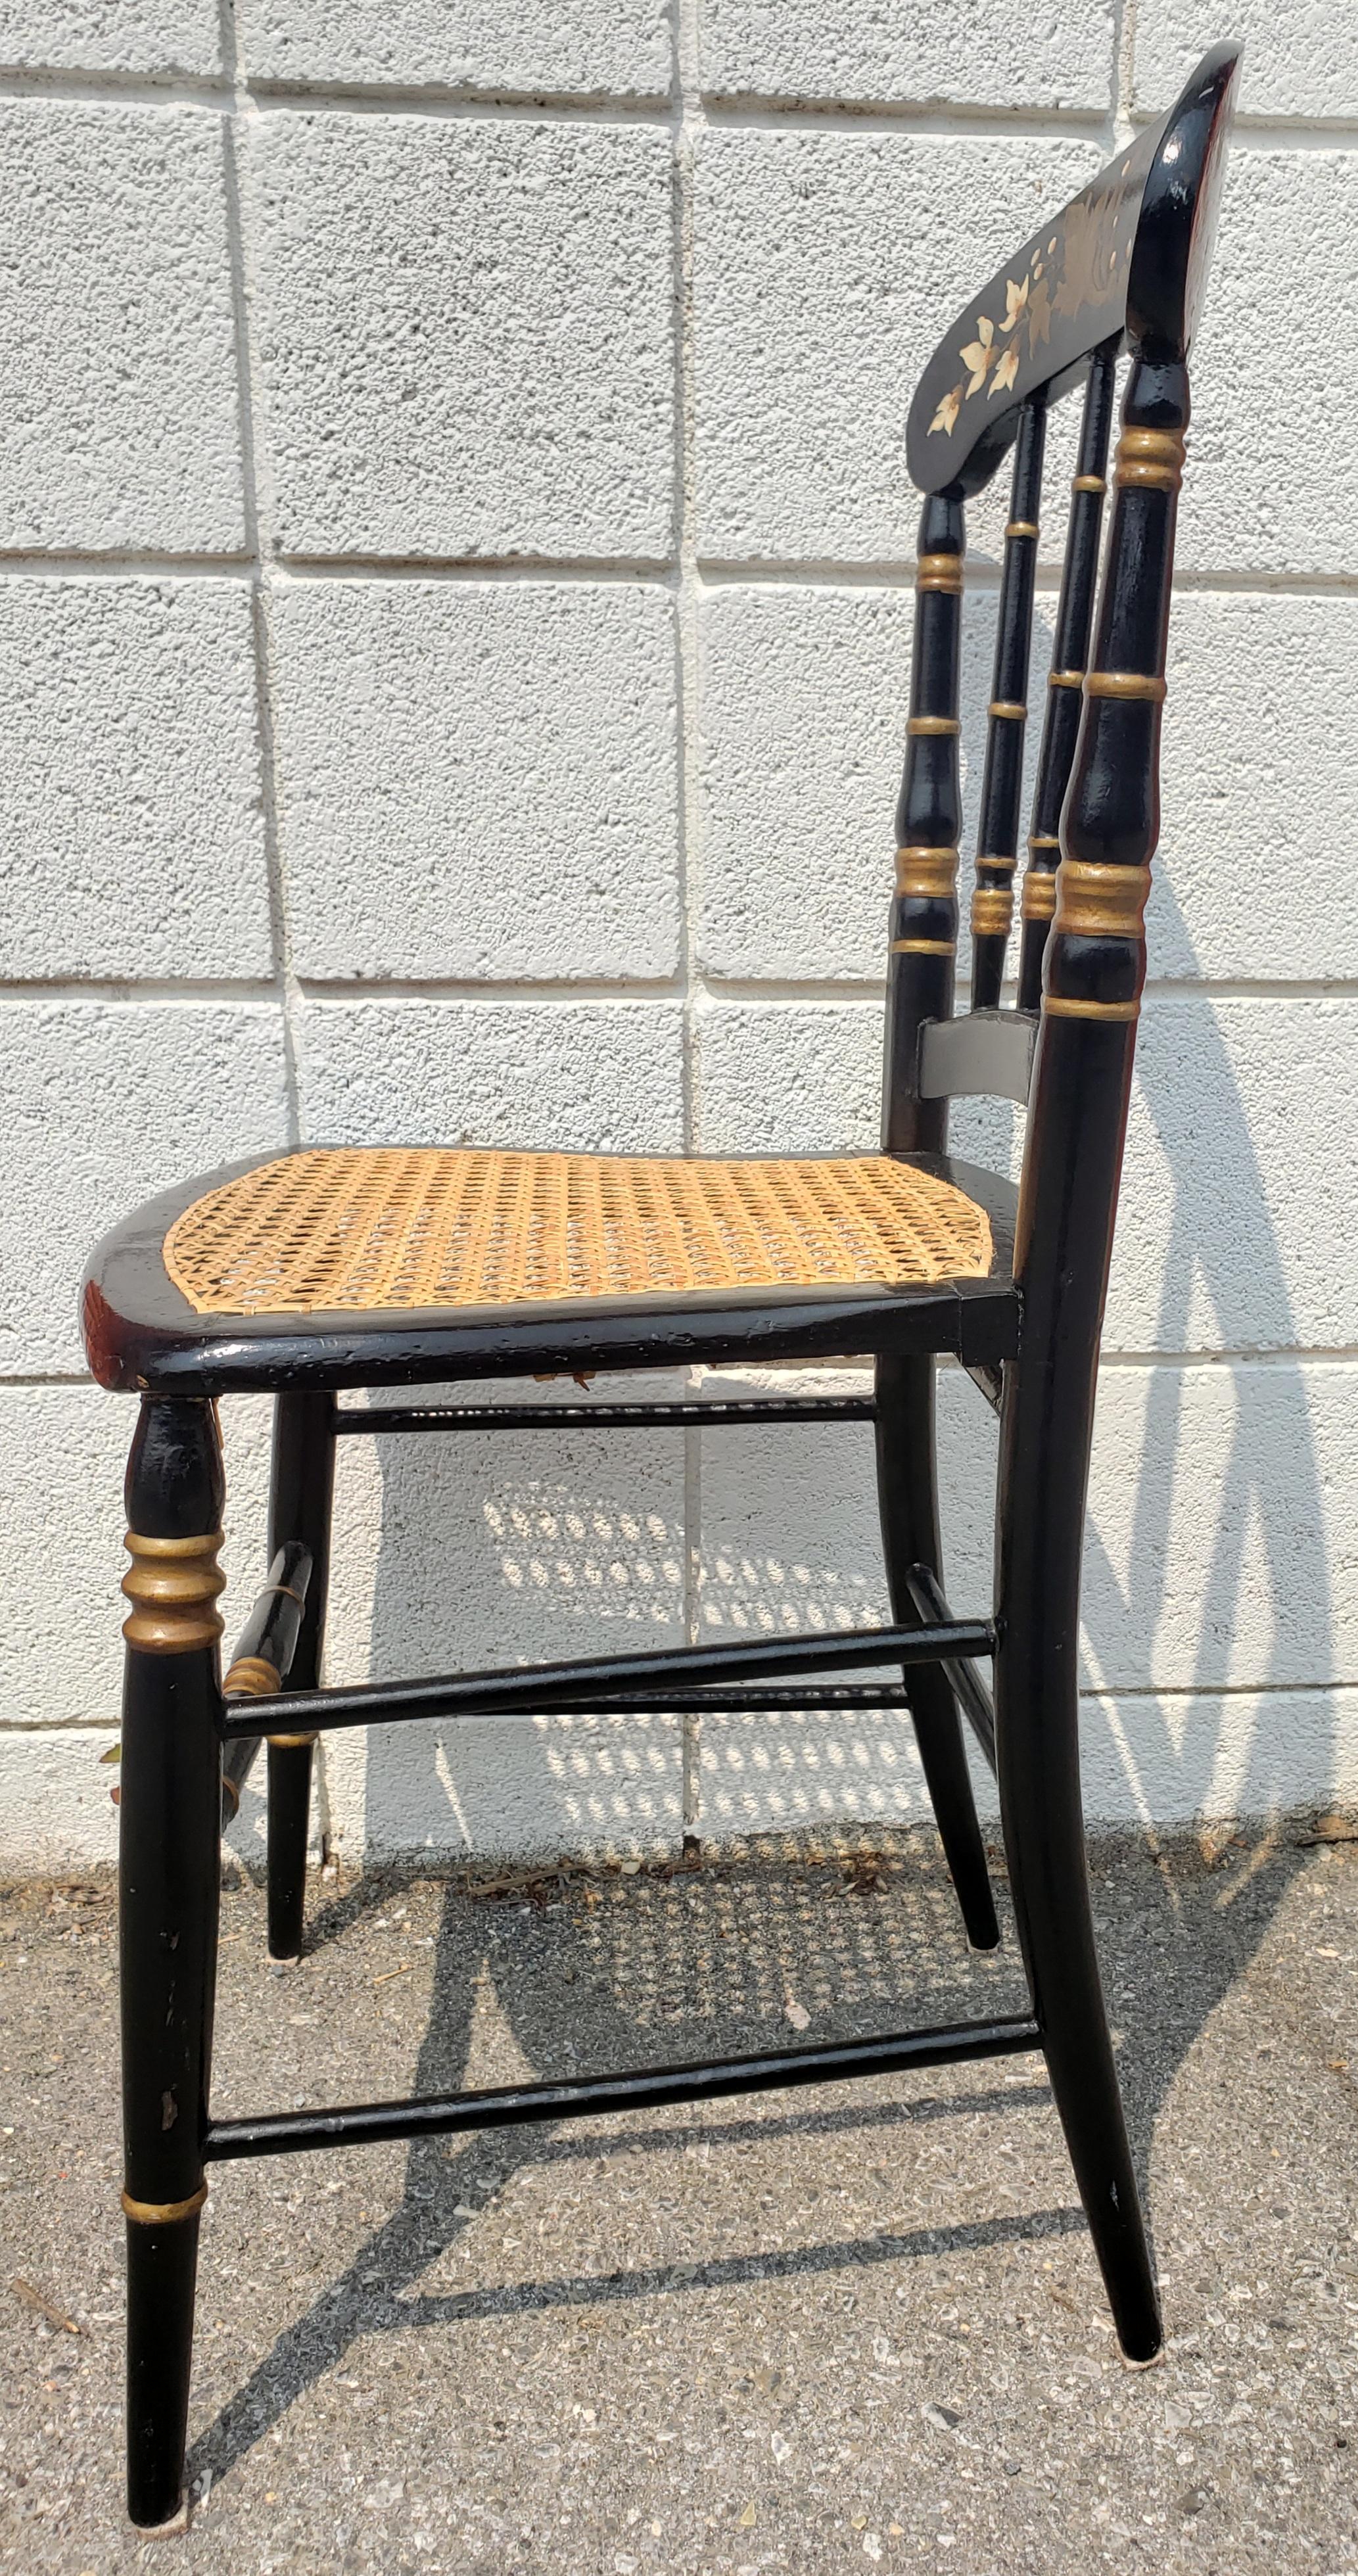 Late 19th Century Ebonized and Parcel Gilt Decorated Cane Seat Side Chair In Good Condition For Sale In Germantown, MD